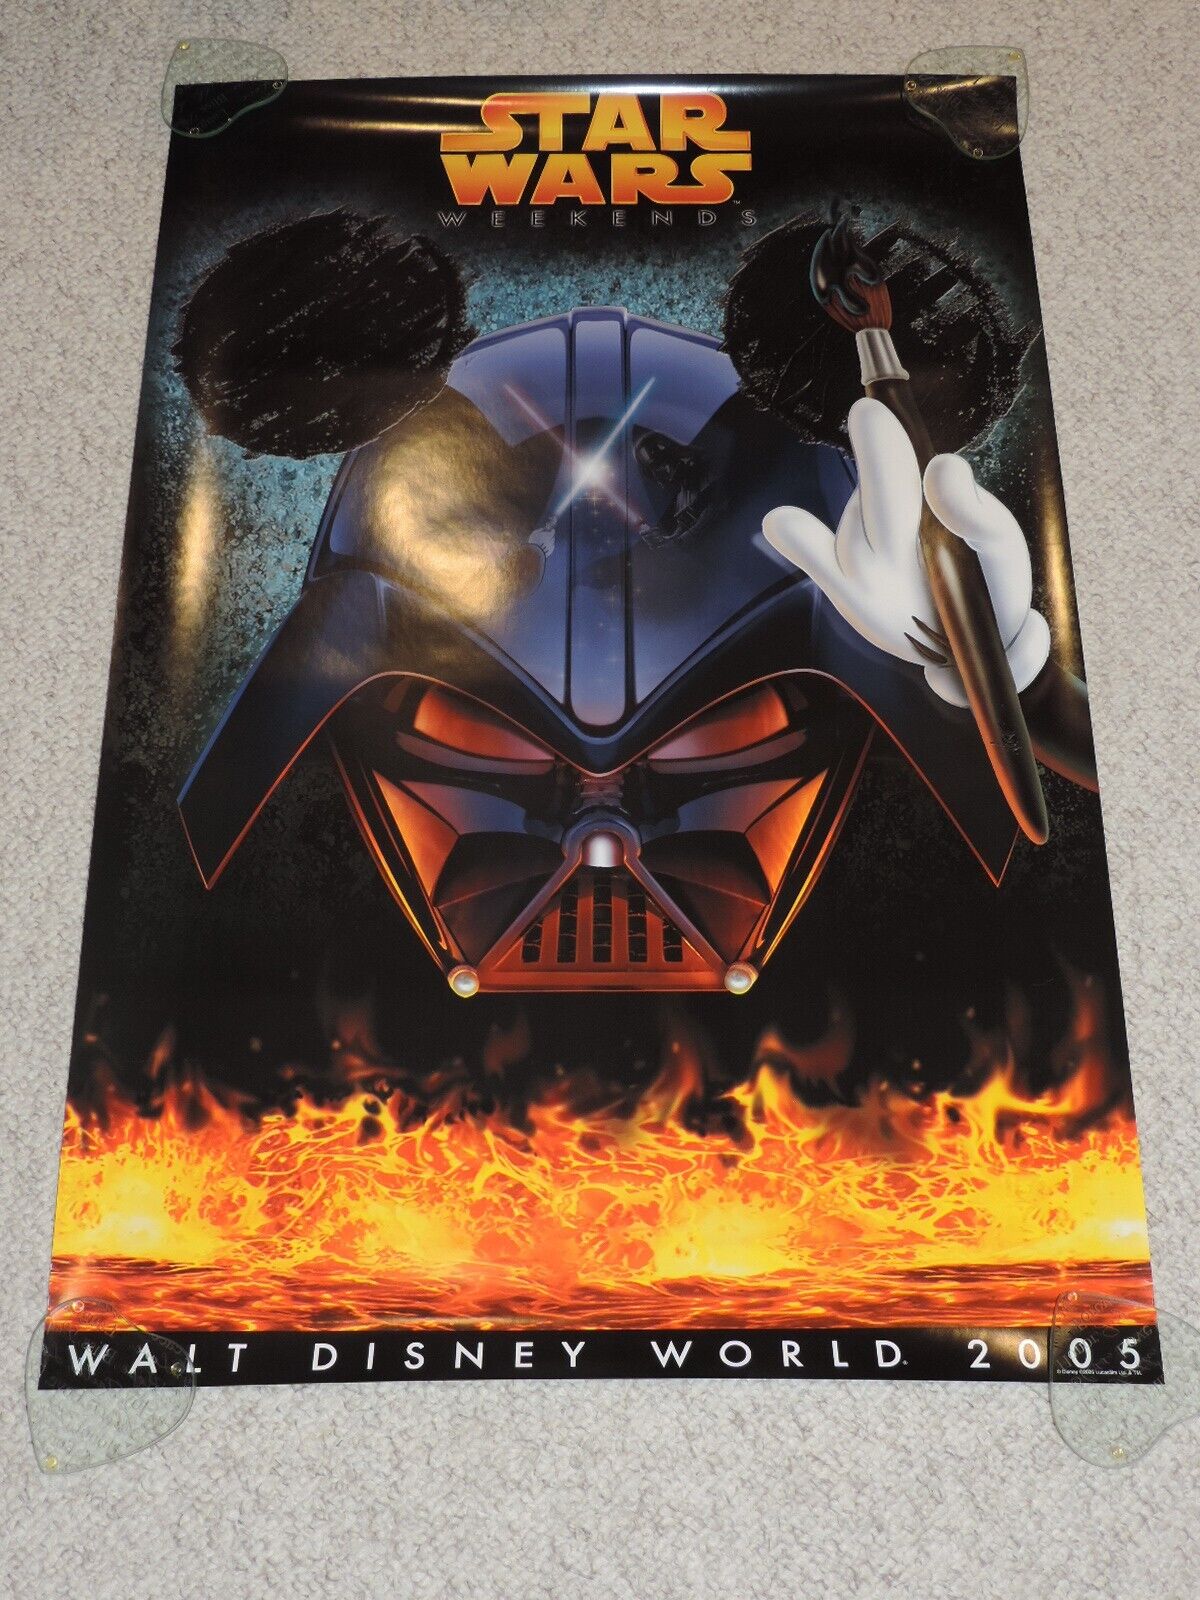 Disney Star Wars Weekends 2005 Original Event Poster Mickey Mouse Darth Vader